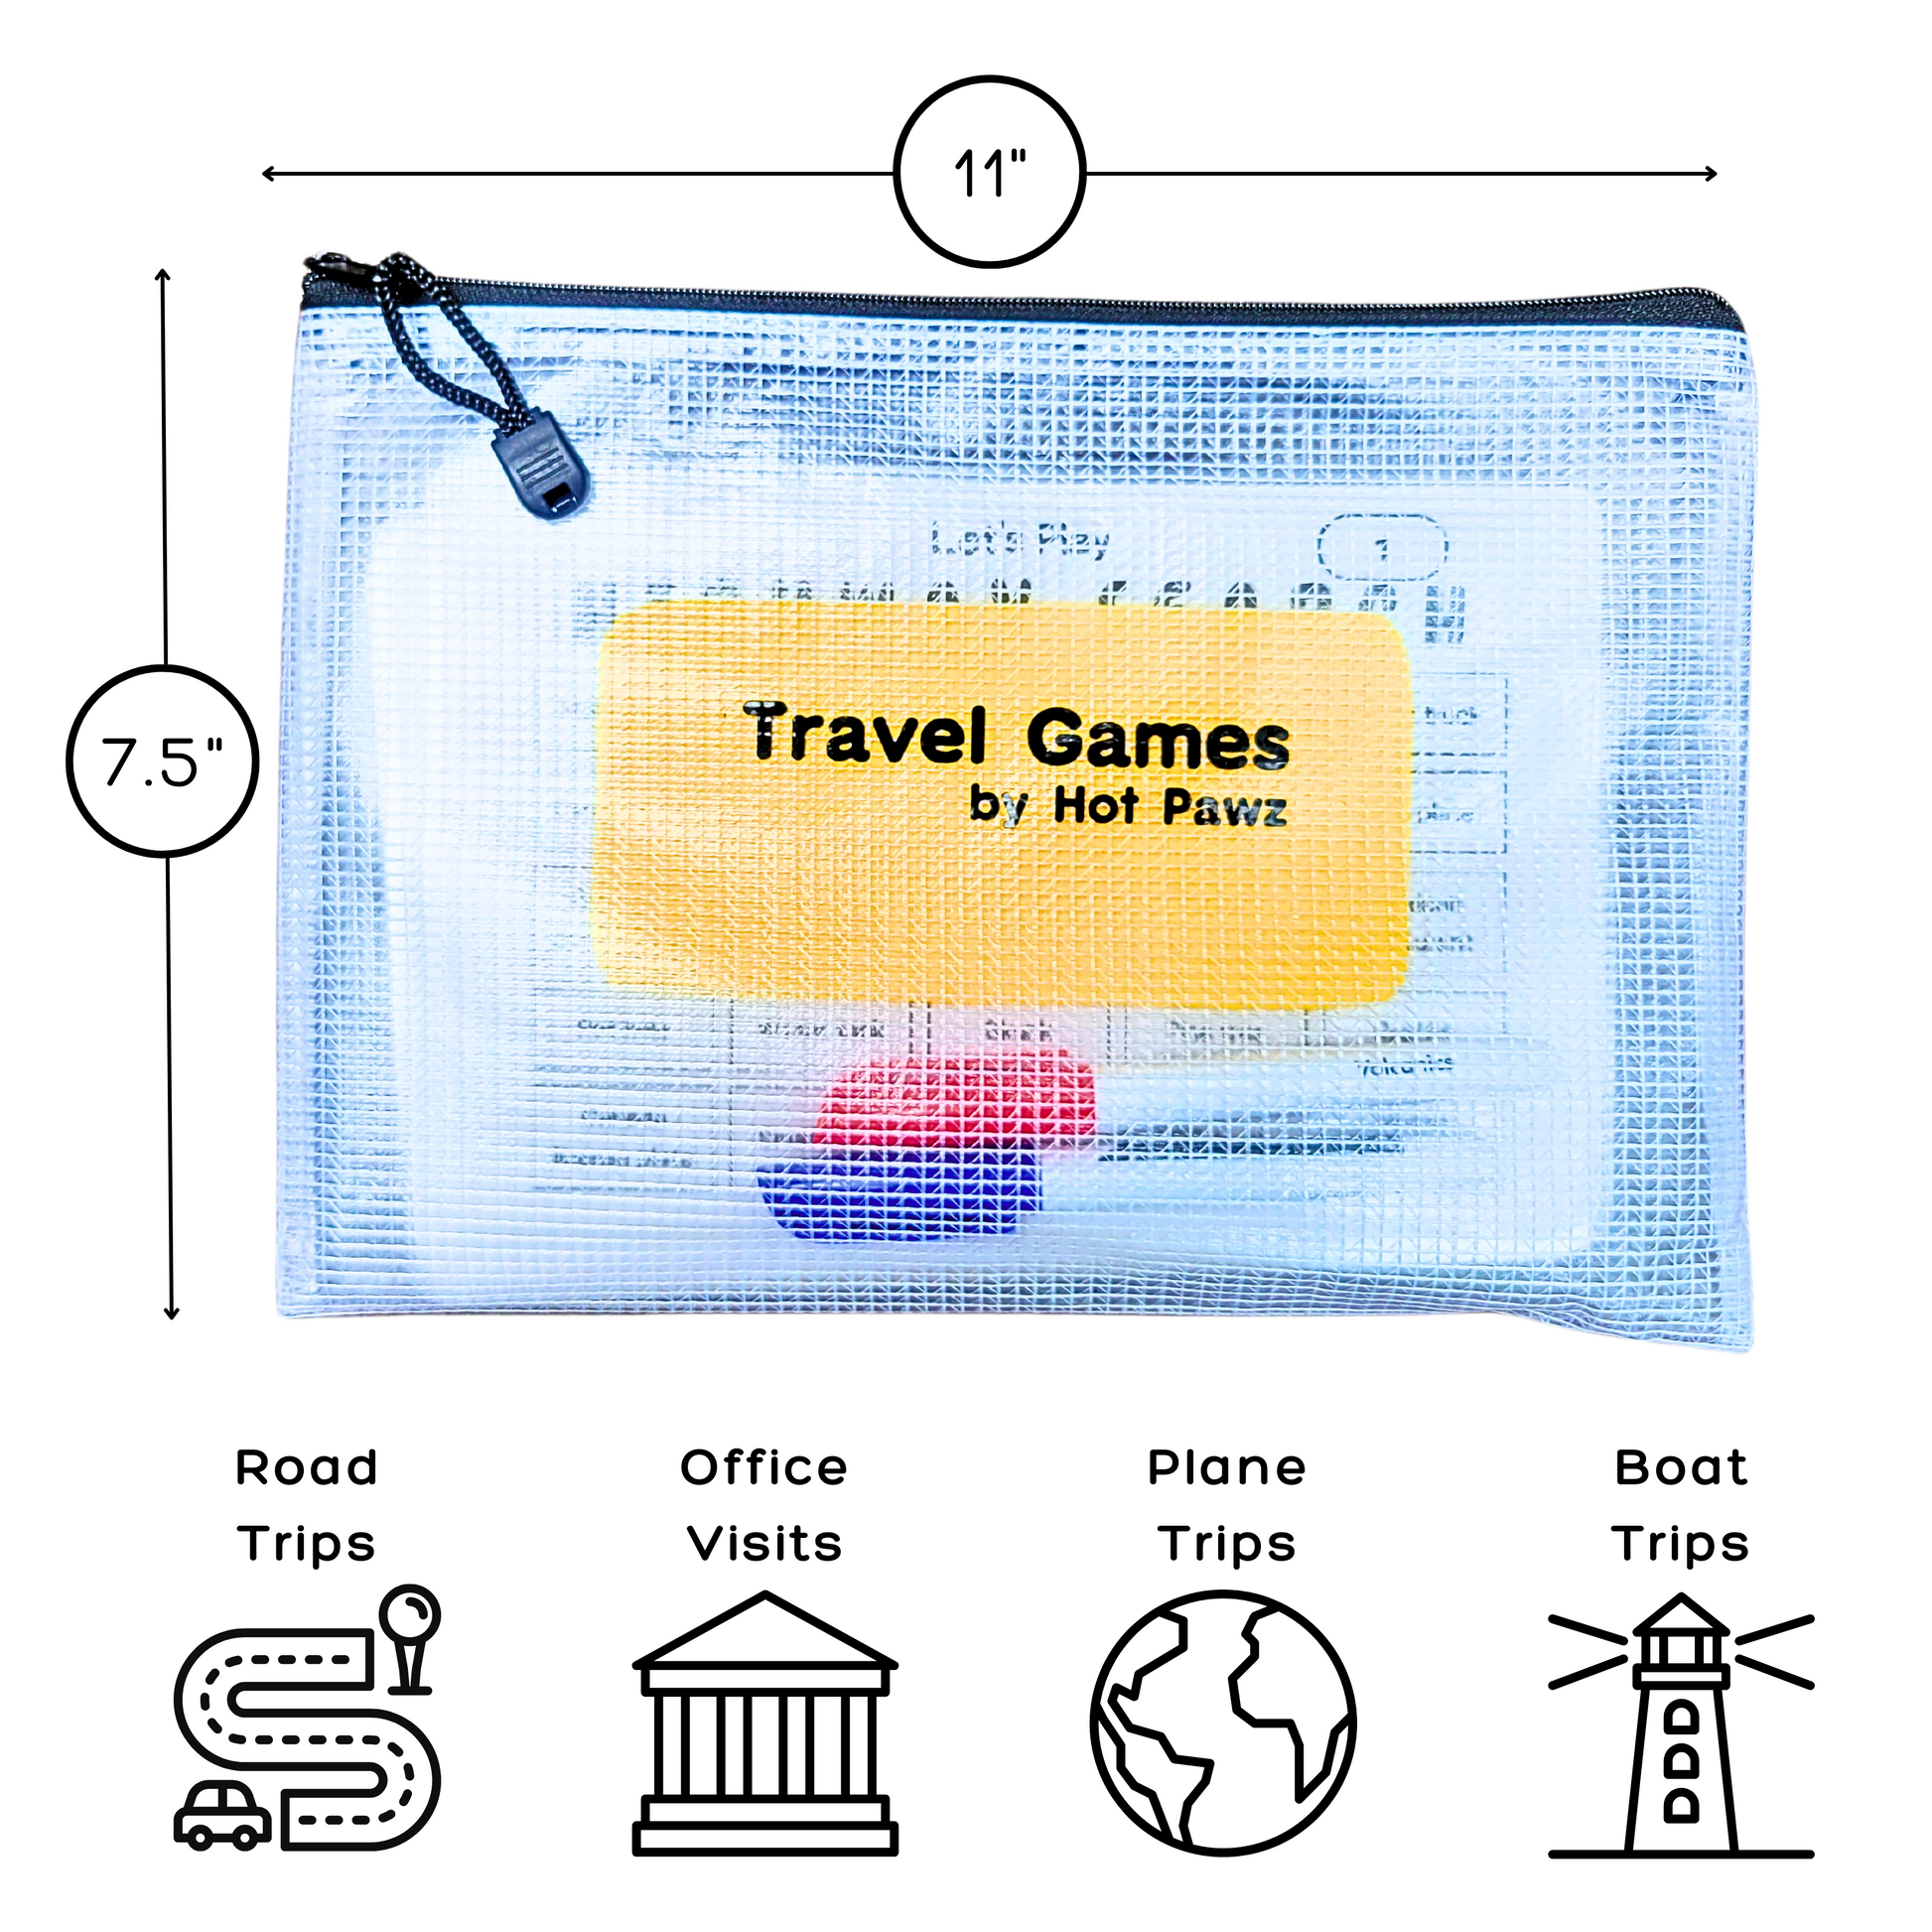 Travel Bundle Games For Families: 72 Unique Games, Reusable Laminated Cards, Scavenger Hunt, Multiplayer Games for Kids, Car and Airplane Approved